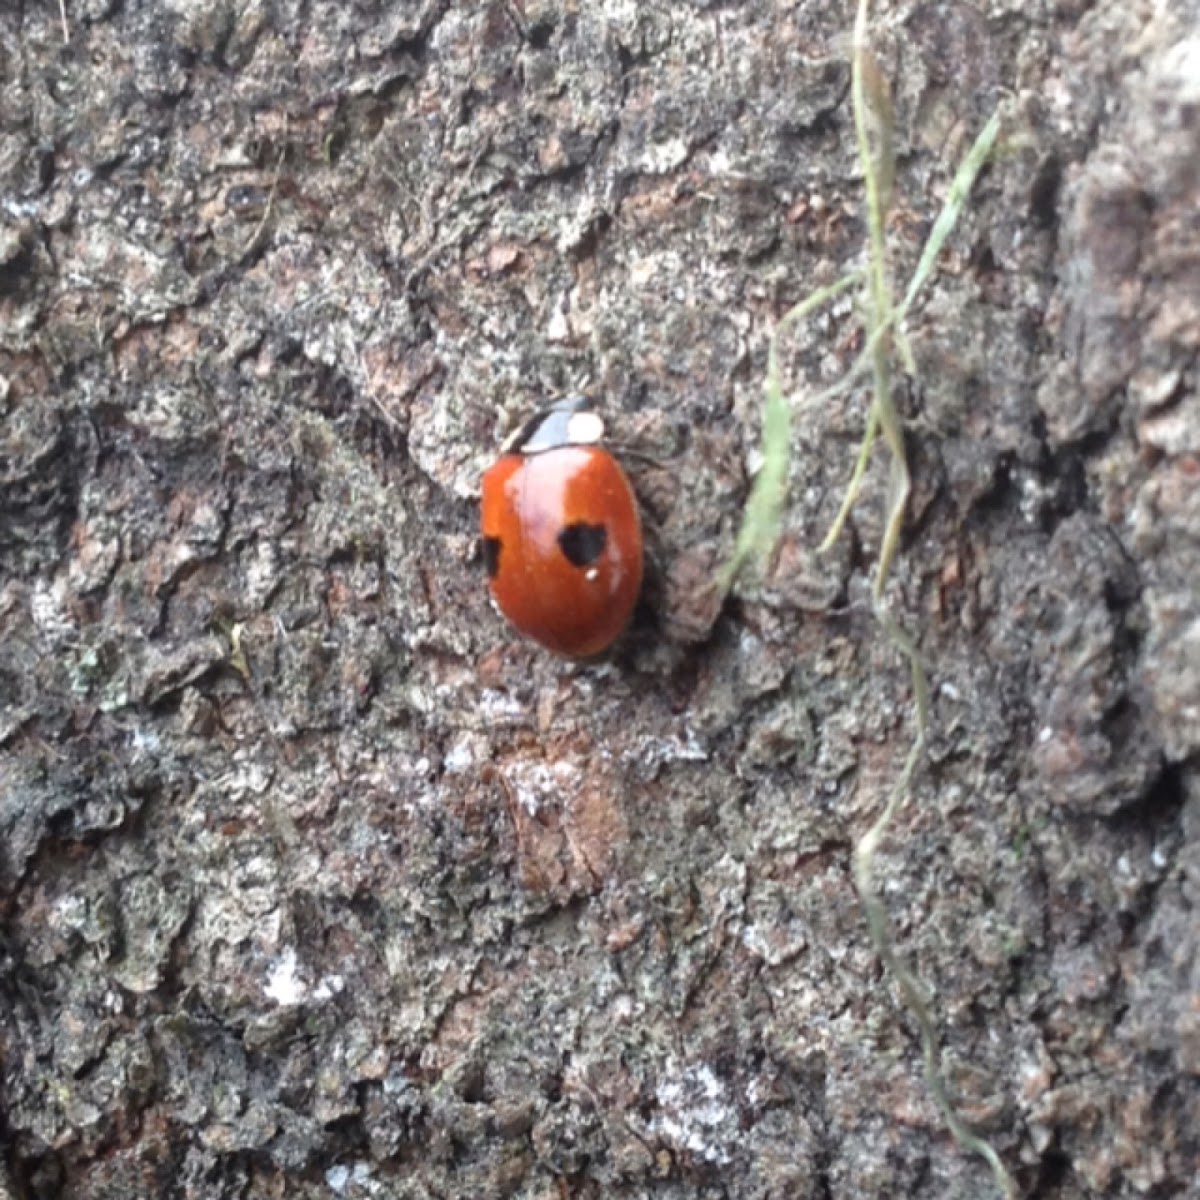 Two-spotted ladybird